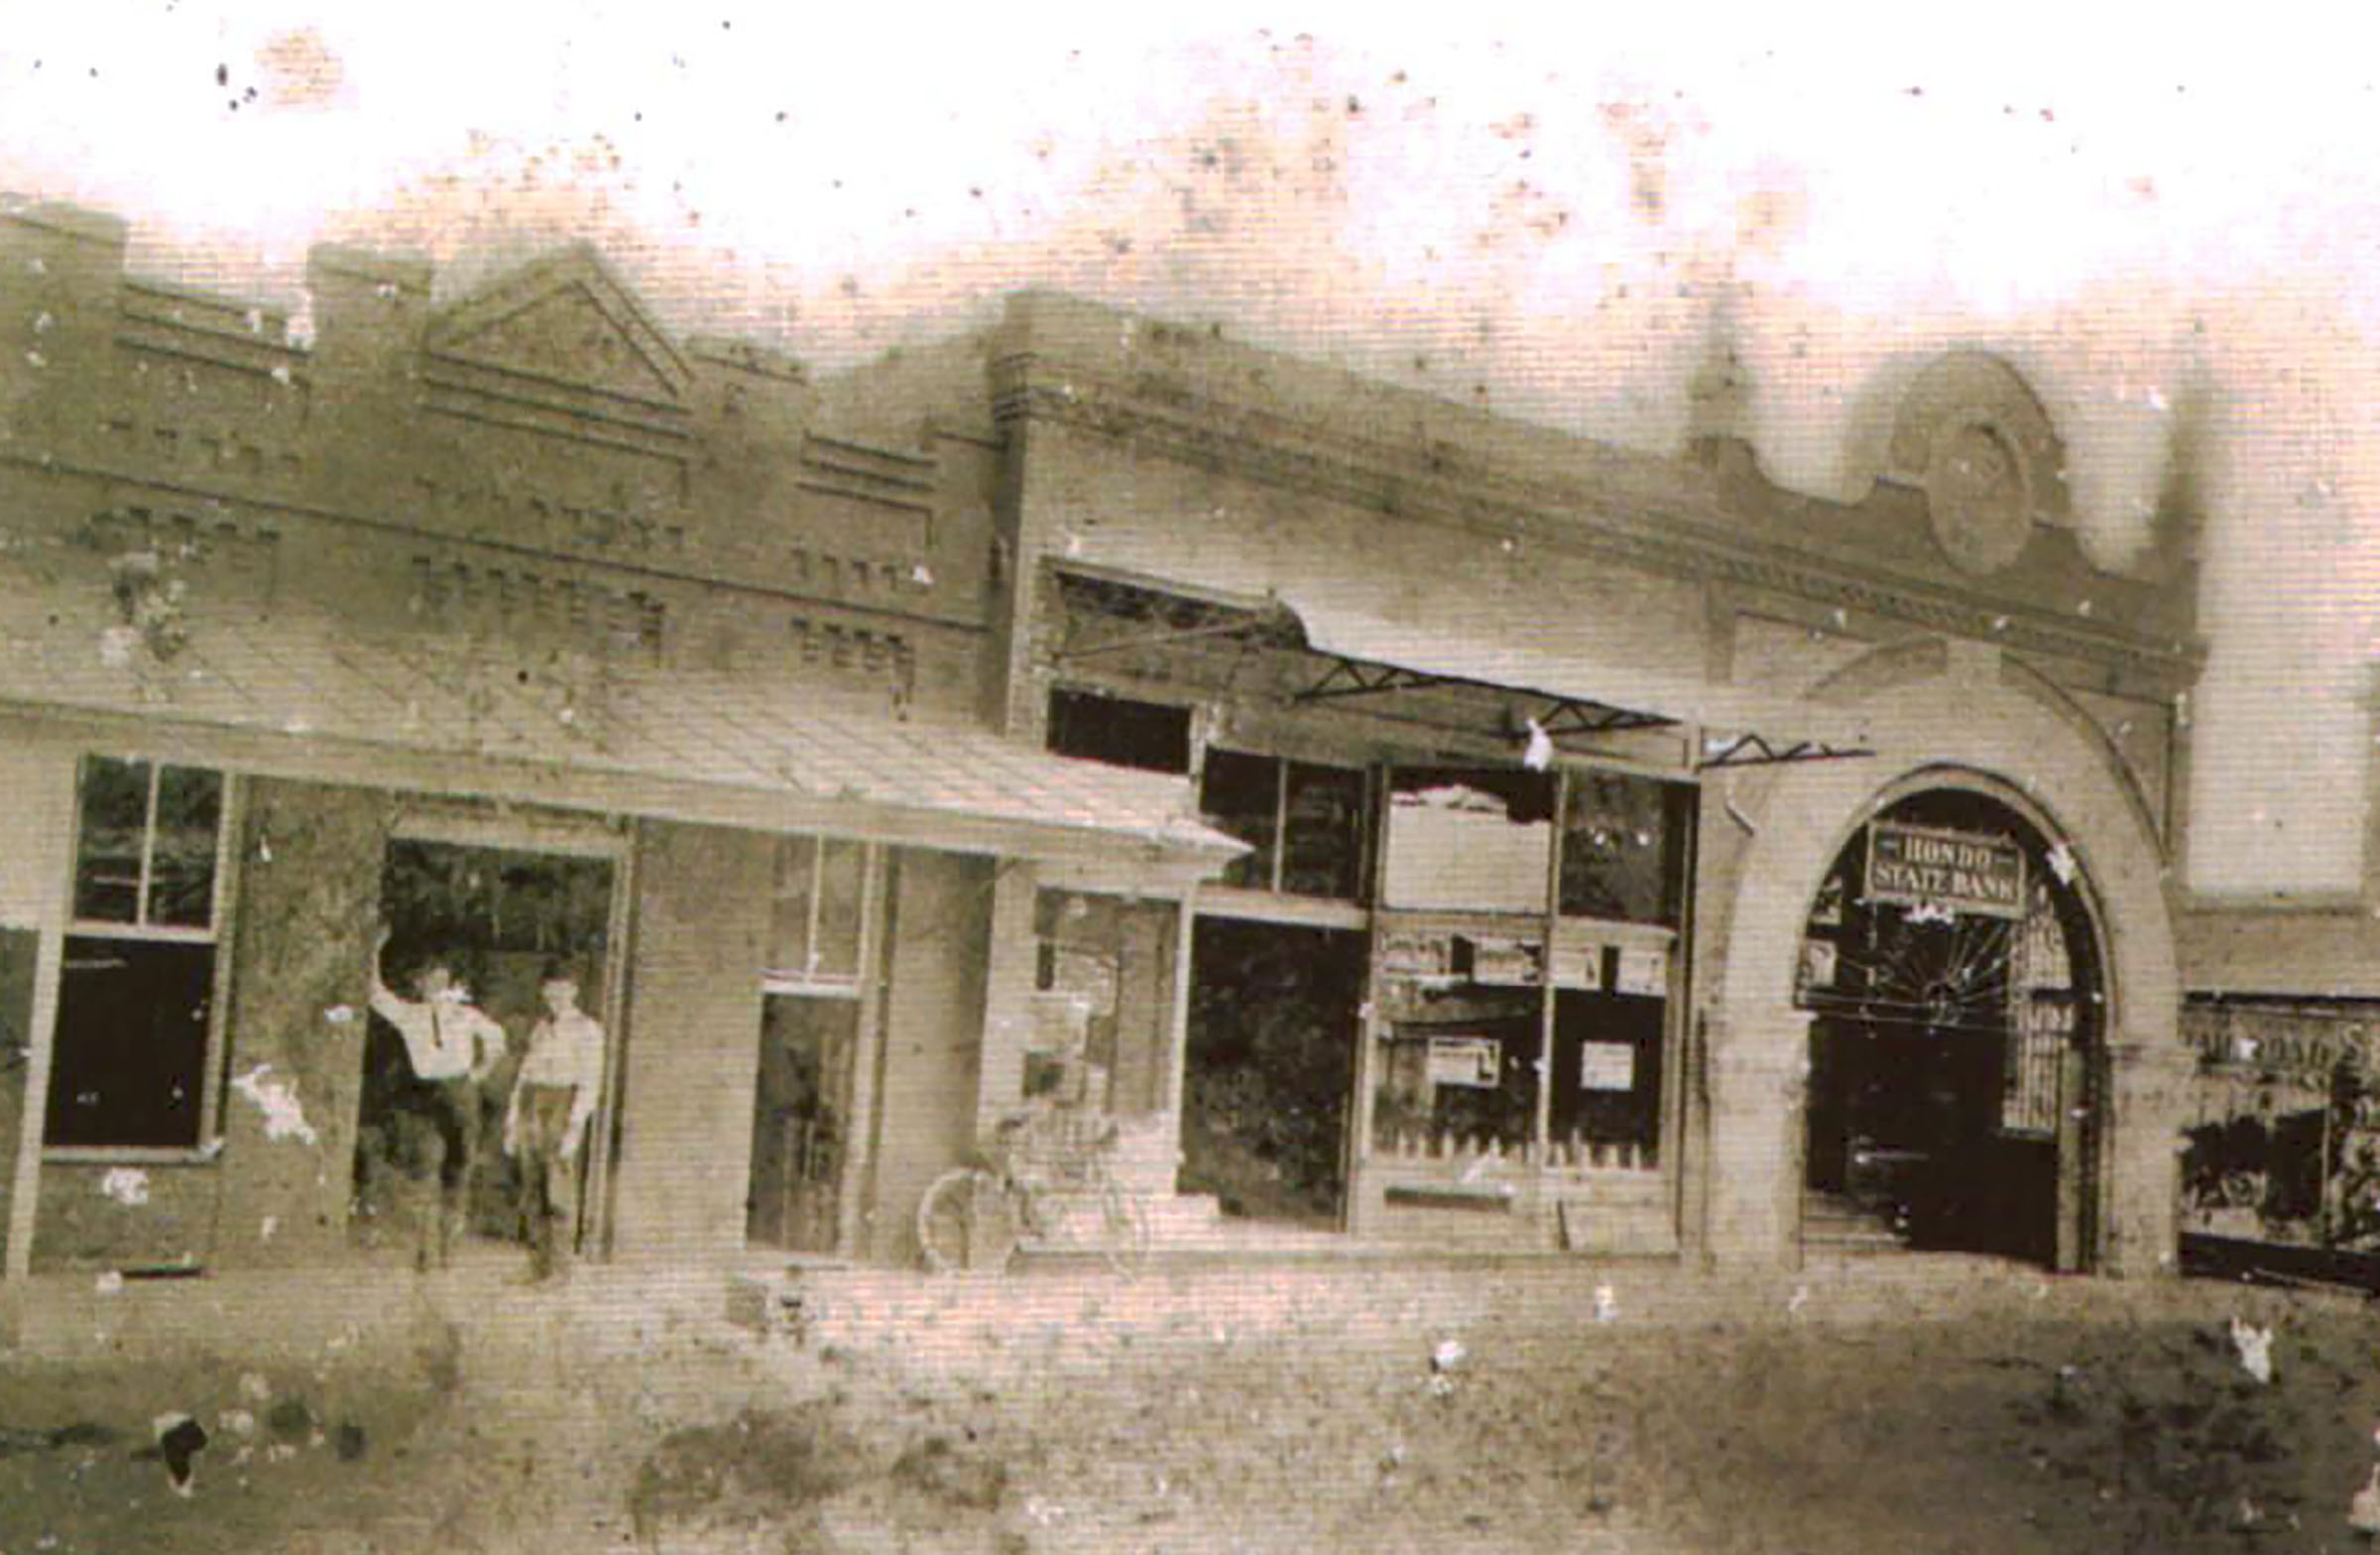 Old photo of the exterior of a bank